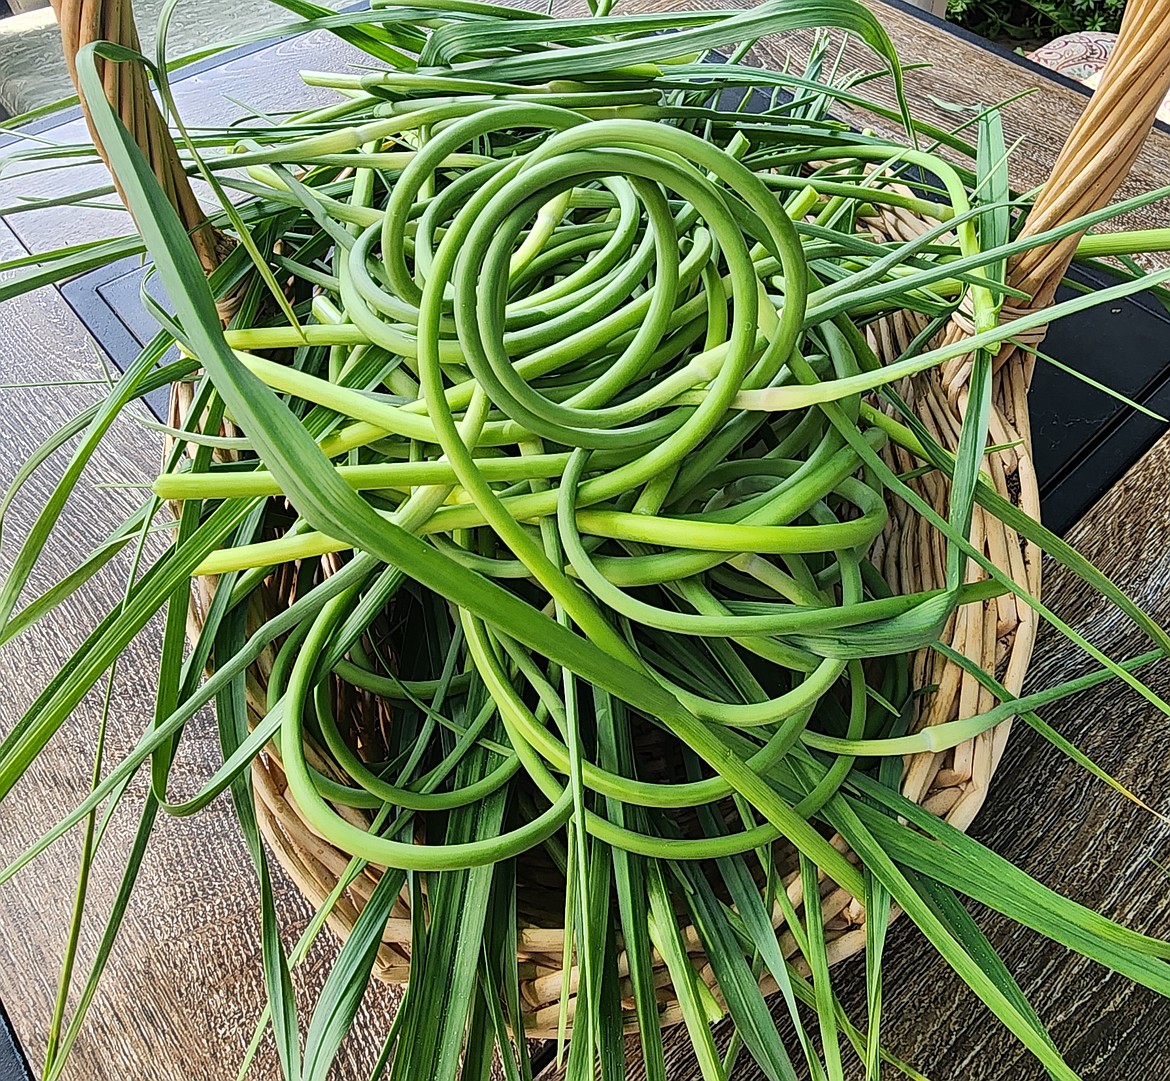 The curlicue stems of hardneck garlic are known as scapes. They are a culinary delight appearing just once a year in Farmer’s Markets.